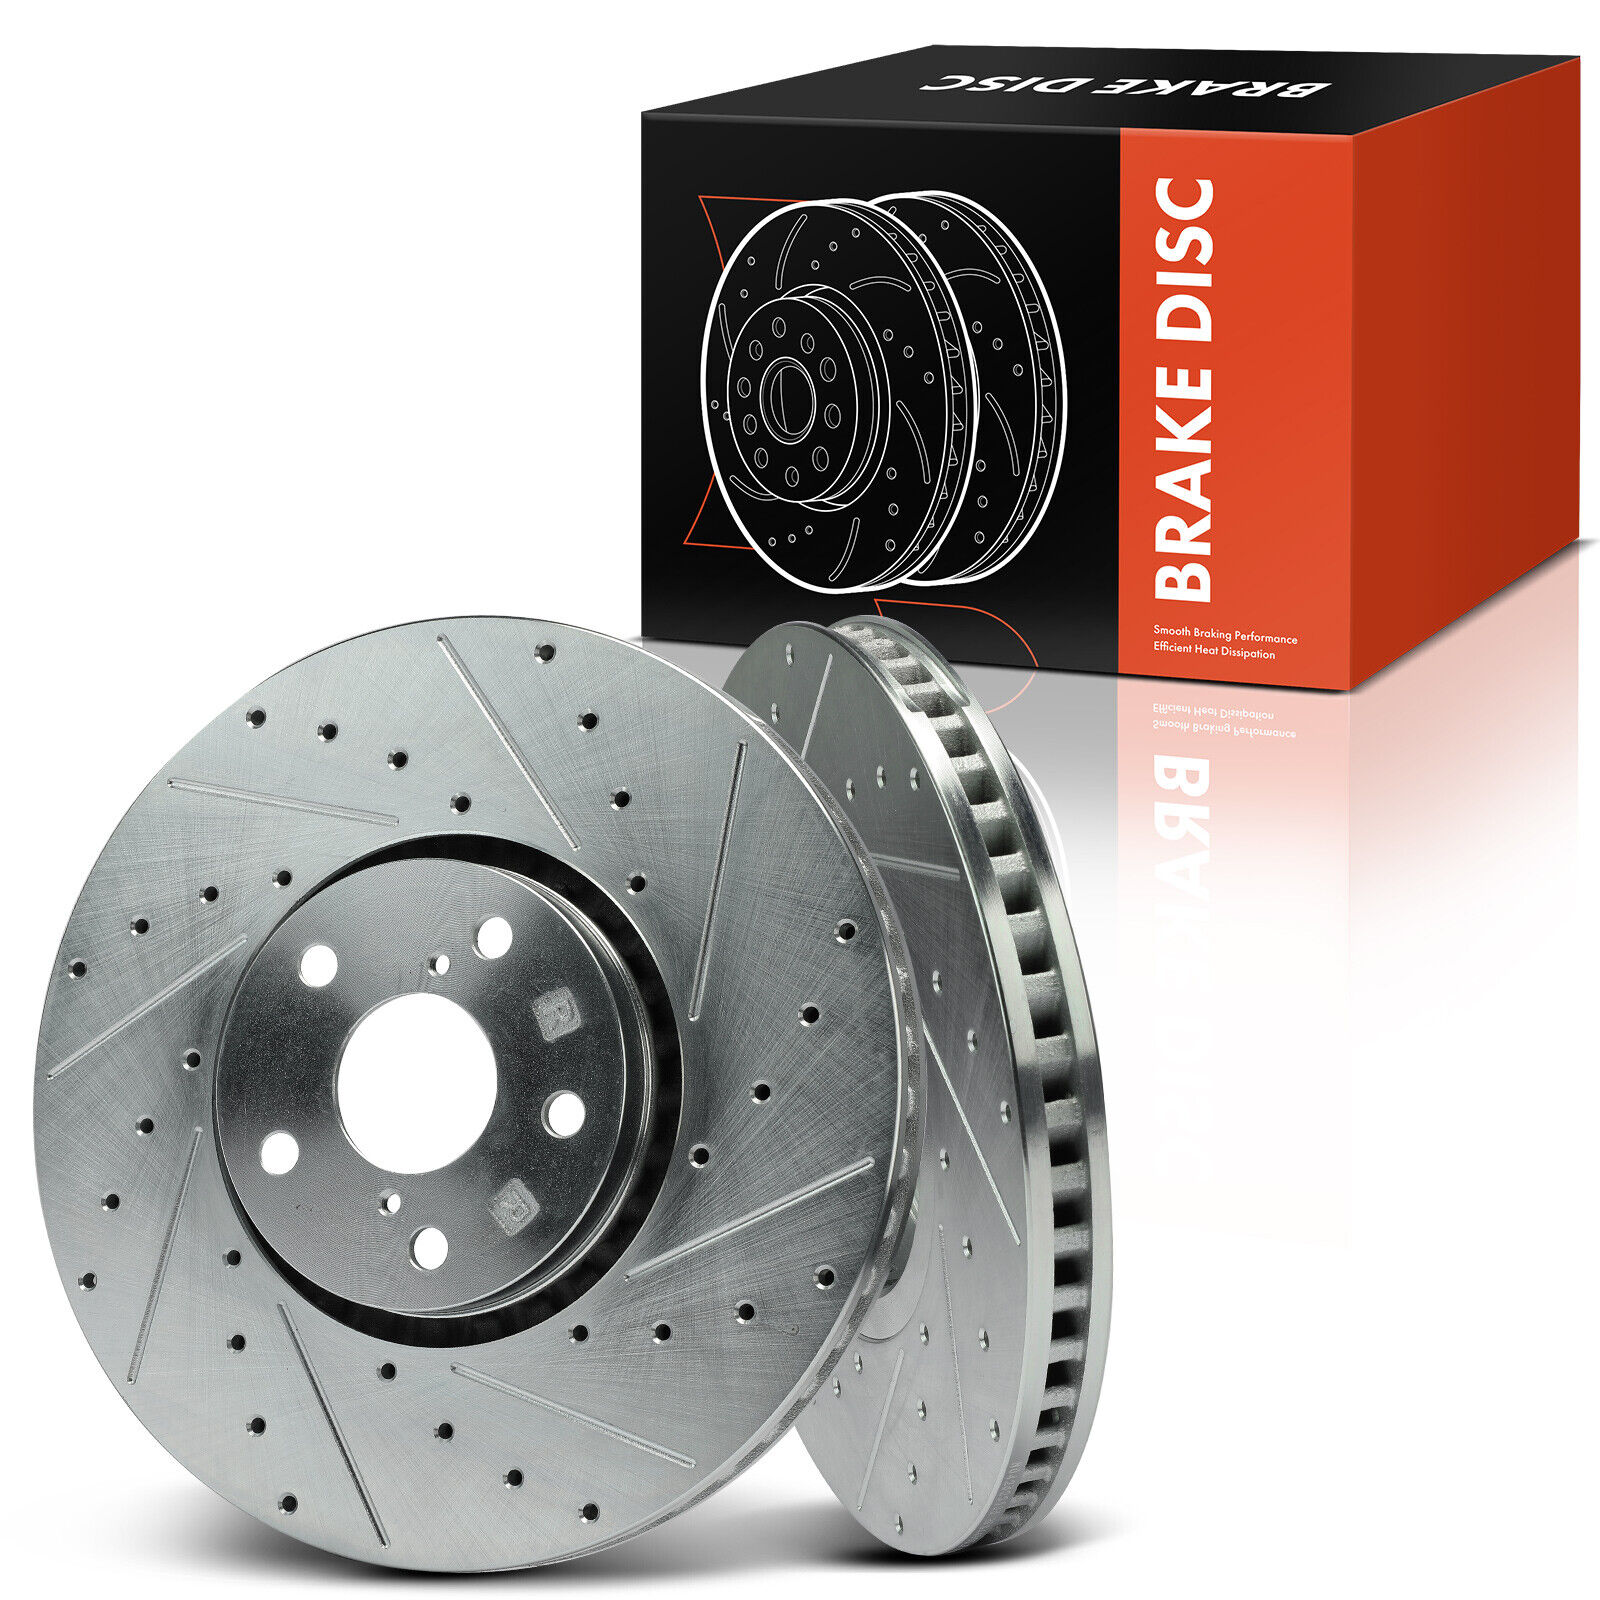 2x Front Drilled Brake Rotors for Lexus IS350 2006-2021 IS250 IS300 GS350 GS430